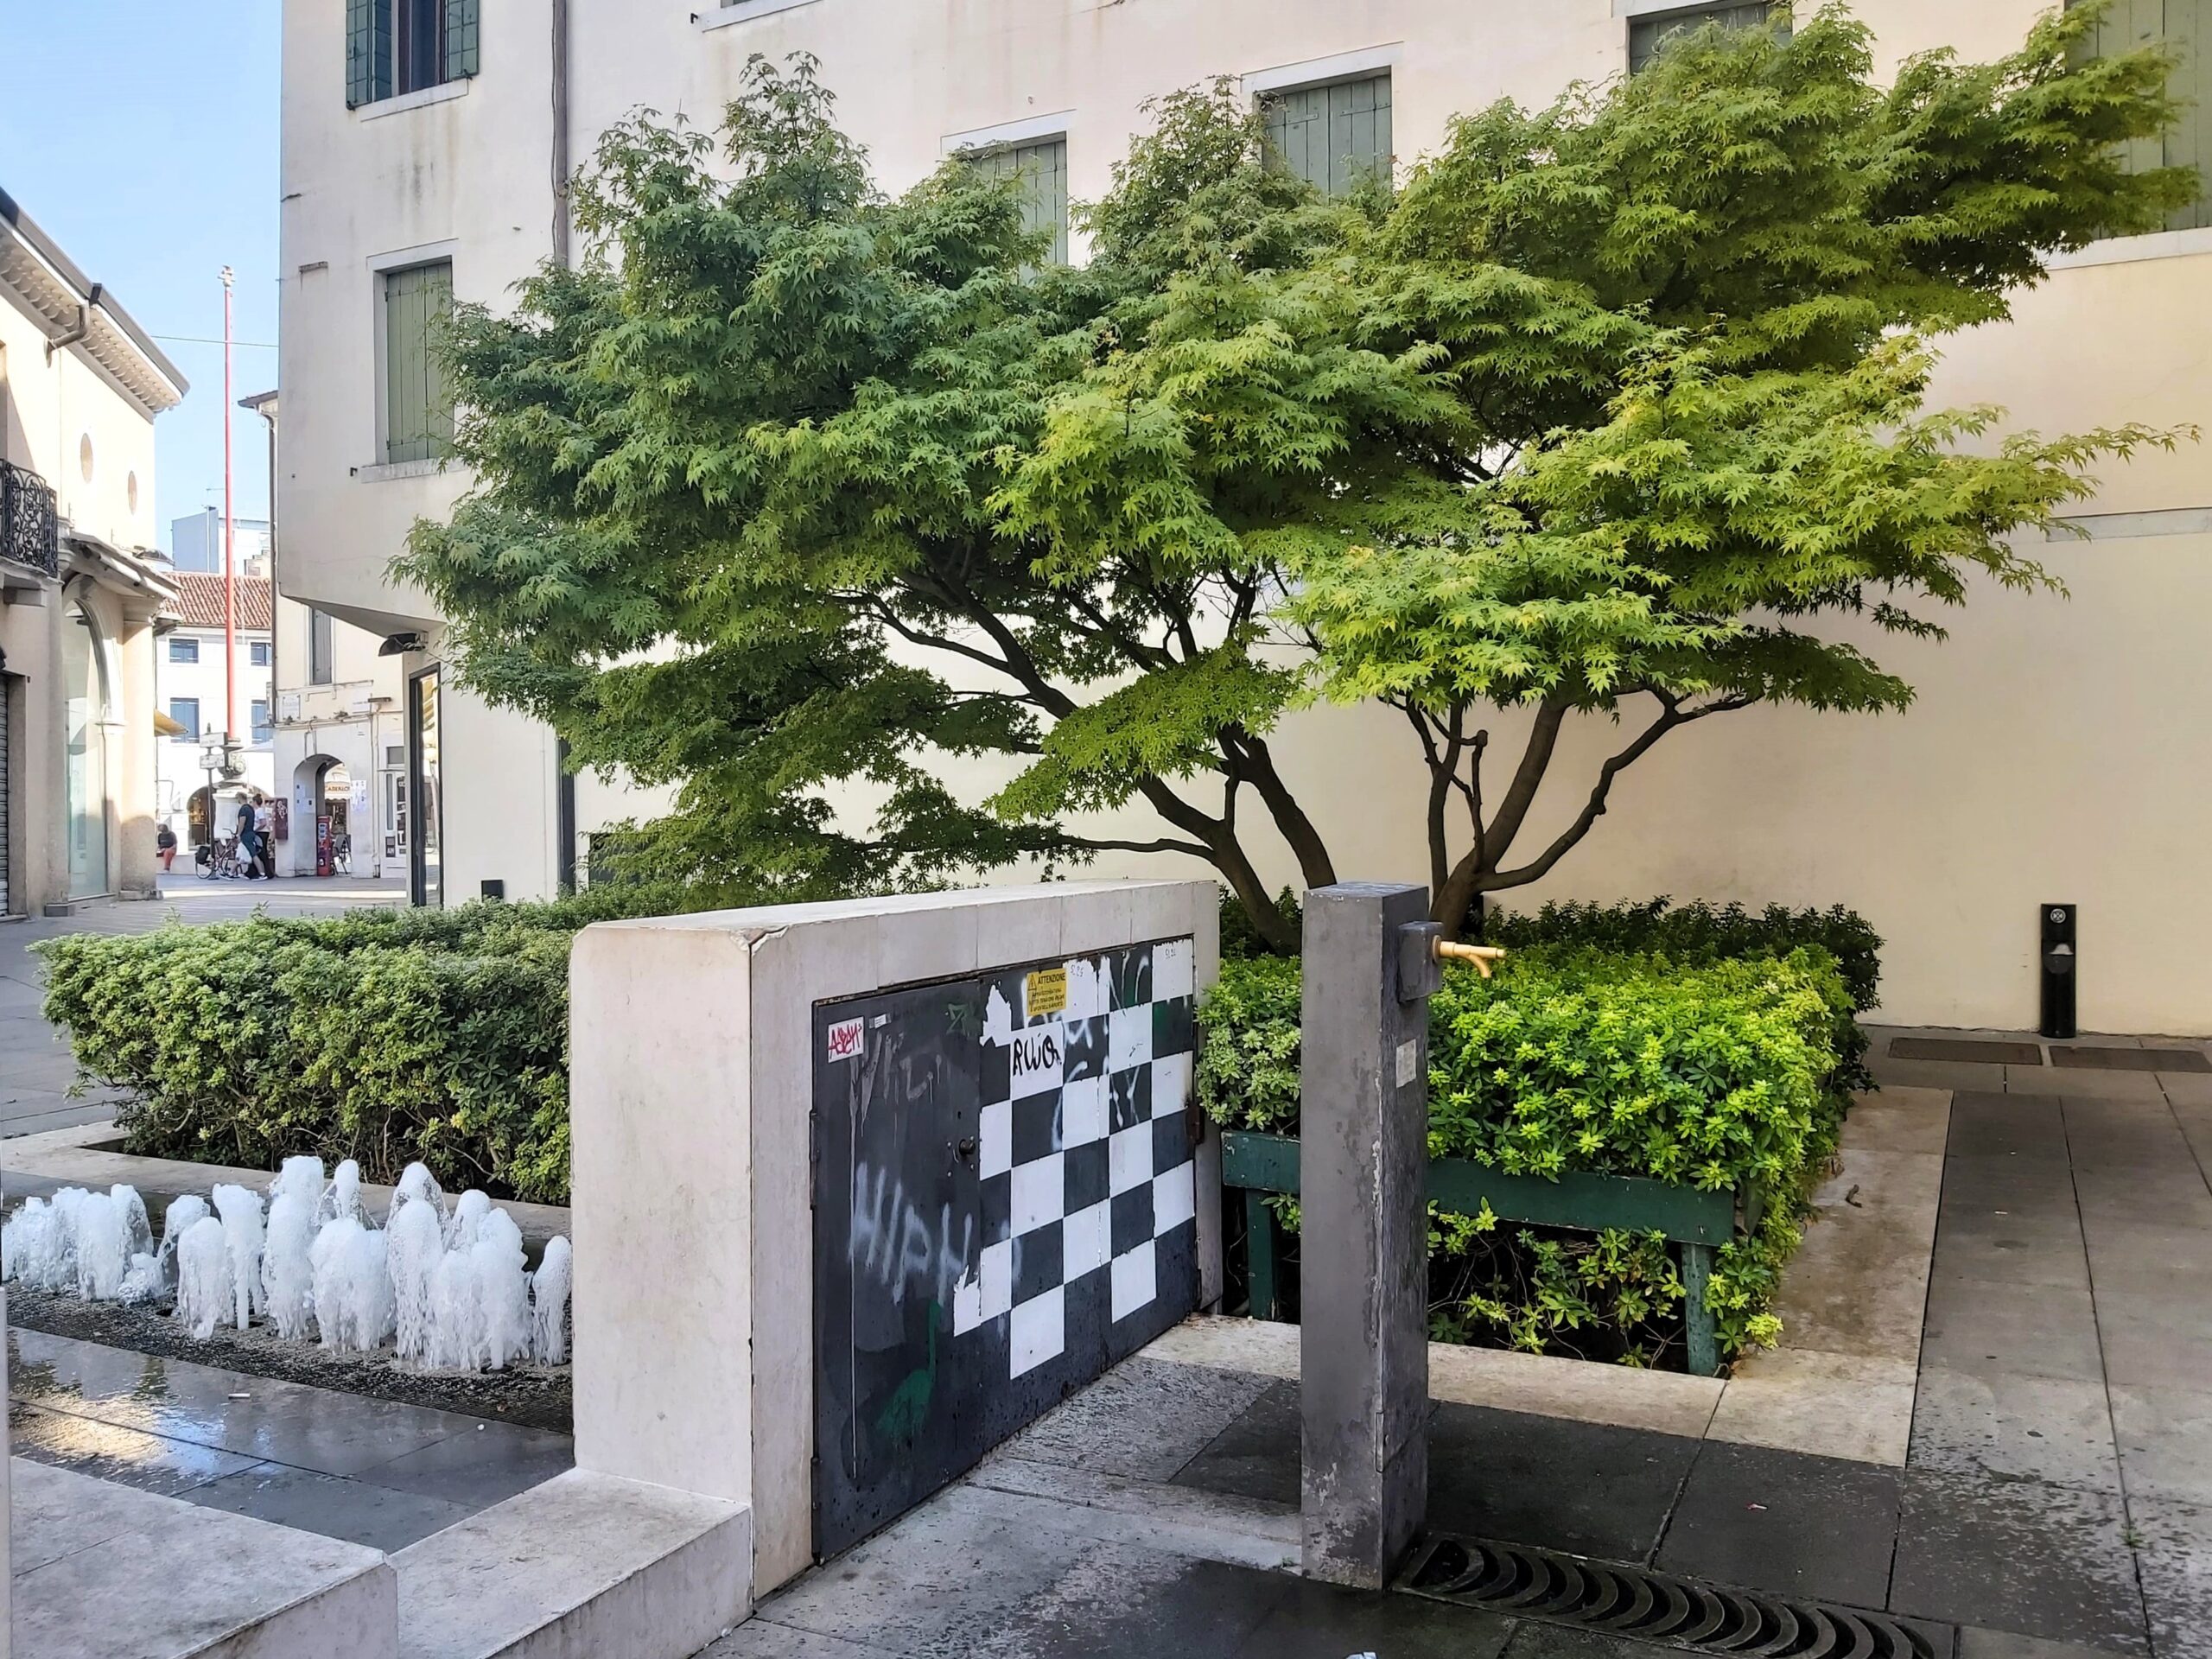 A beautiful Japanese-looking tree in Mestre, Italy by a small modern fountain.